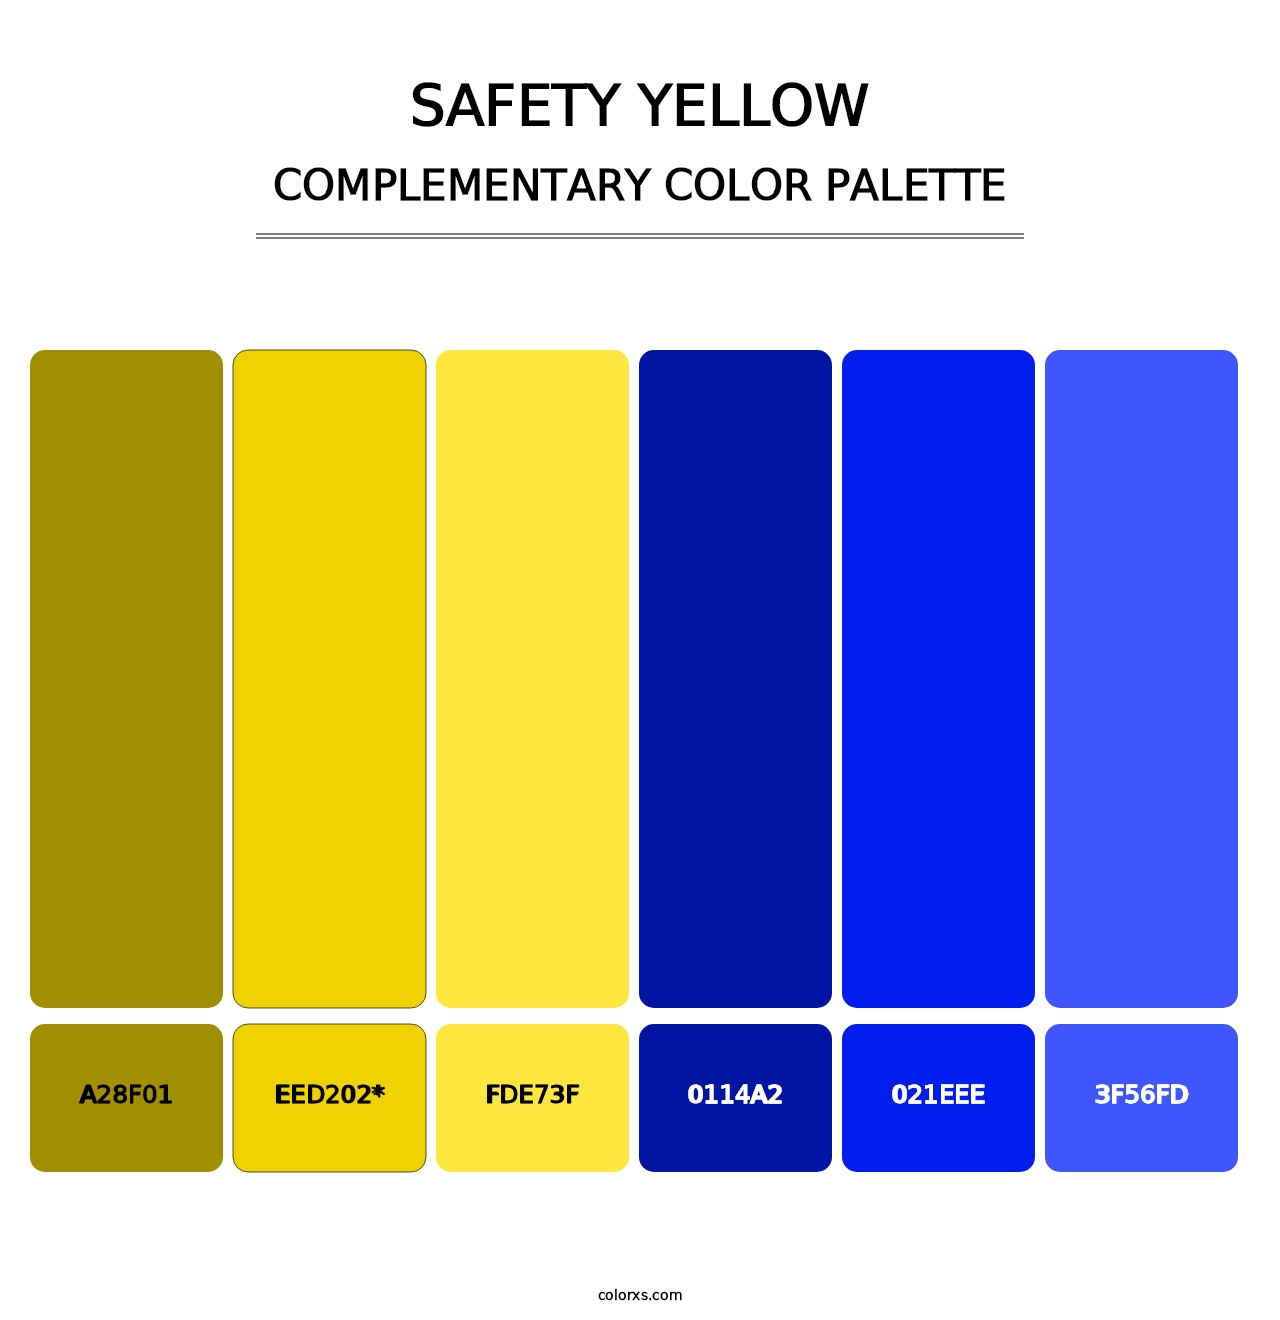 Safety Yellow - Complementary Color Palette